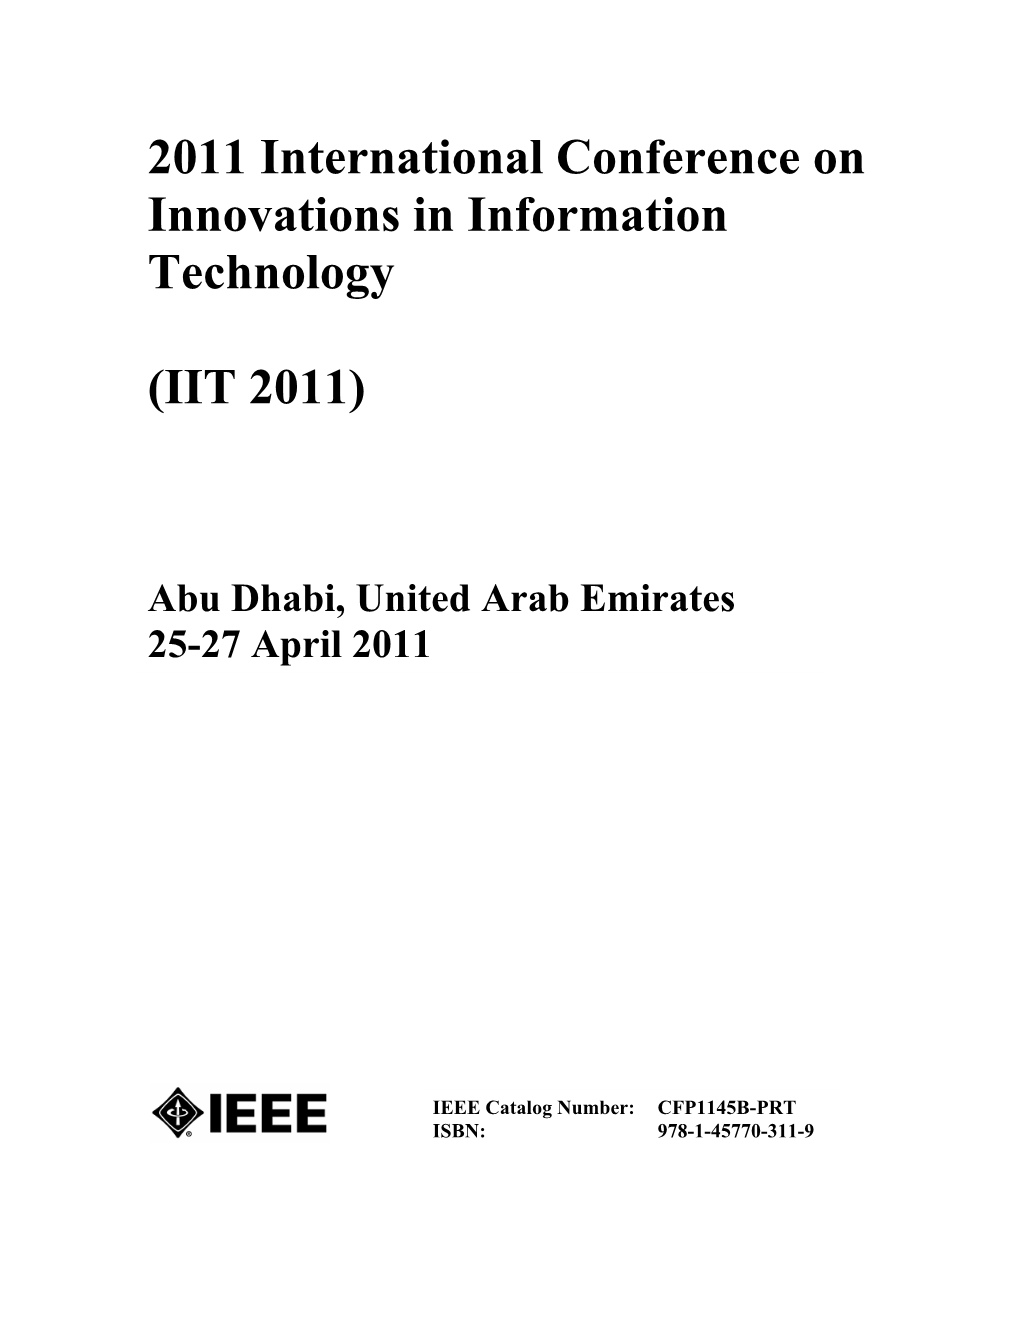 2011 International Conference on Innovations in Information Technology